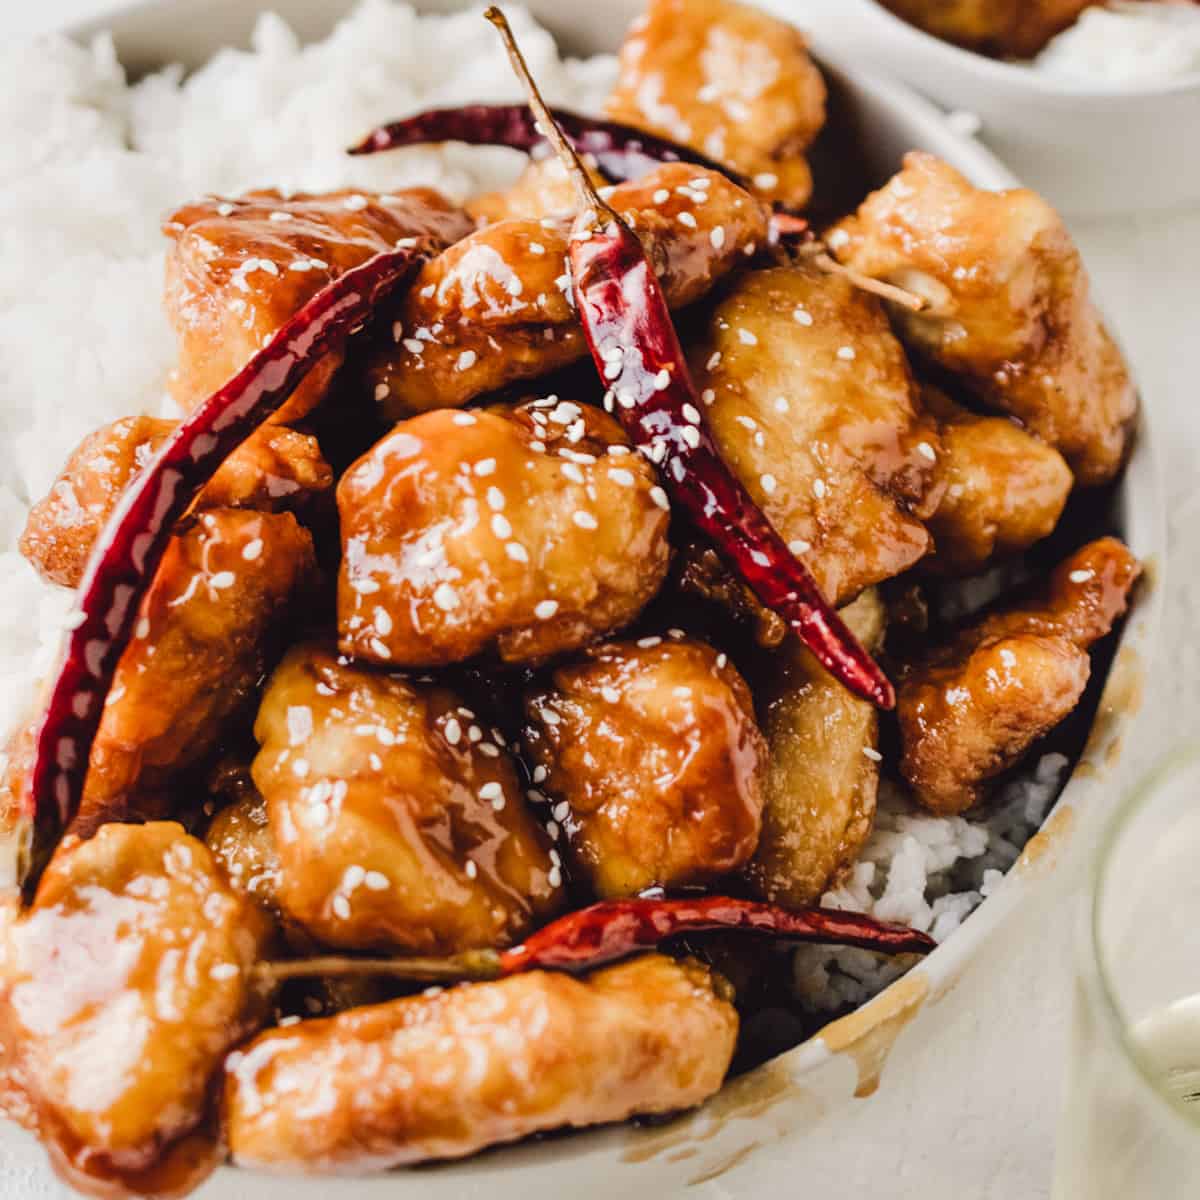 Gluten free fried chicken pieces in a general Tso sauce with chili pods.